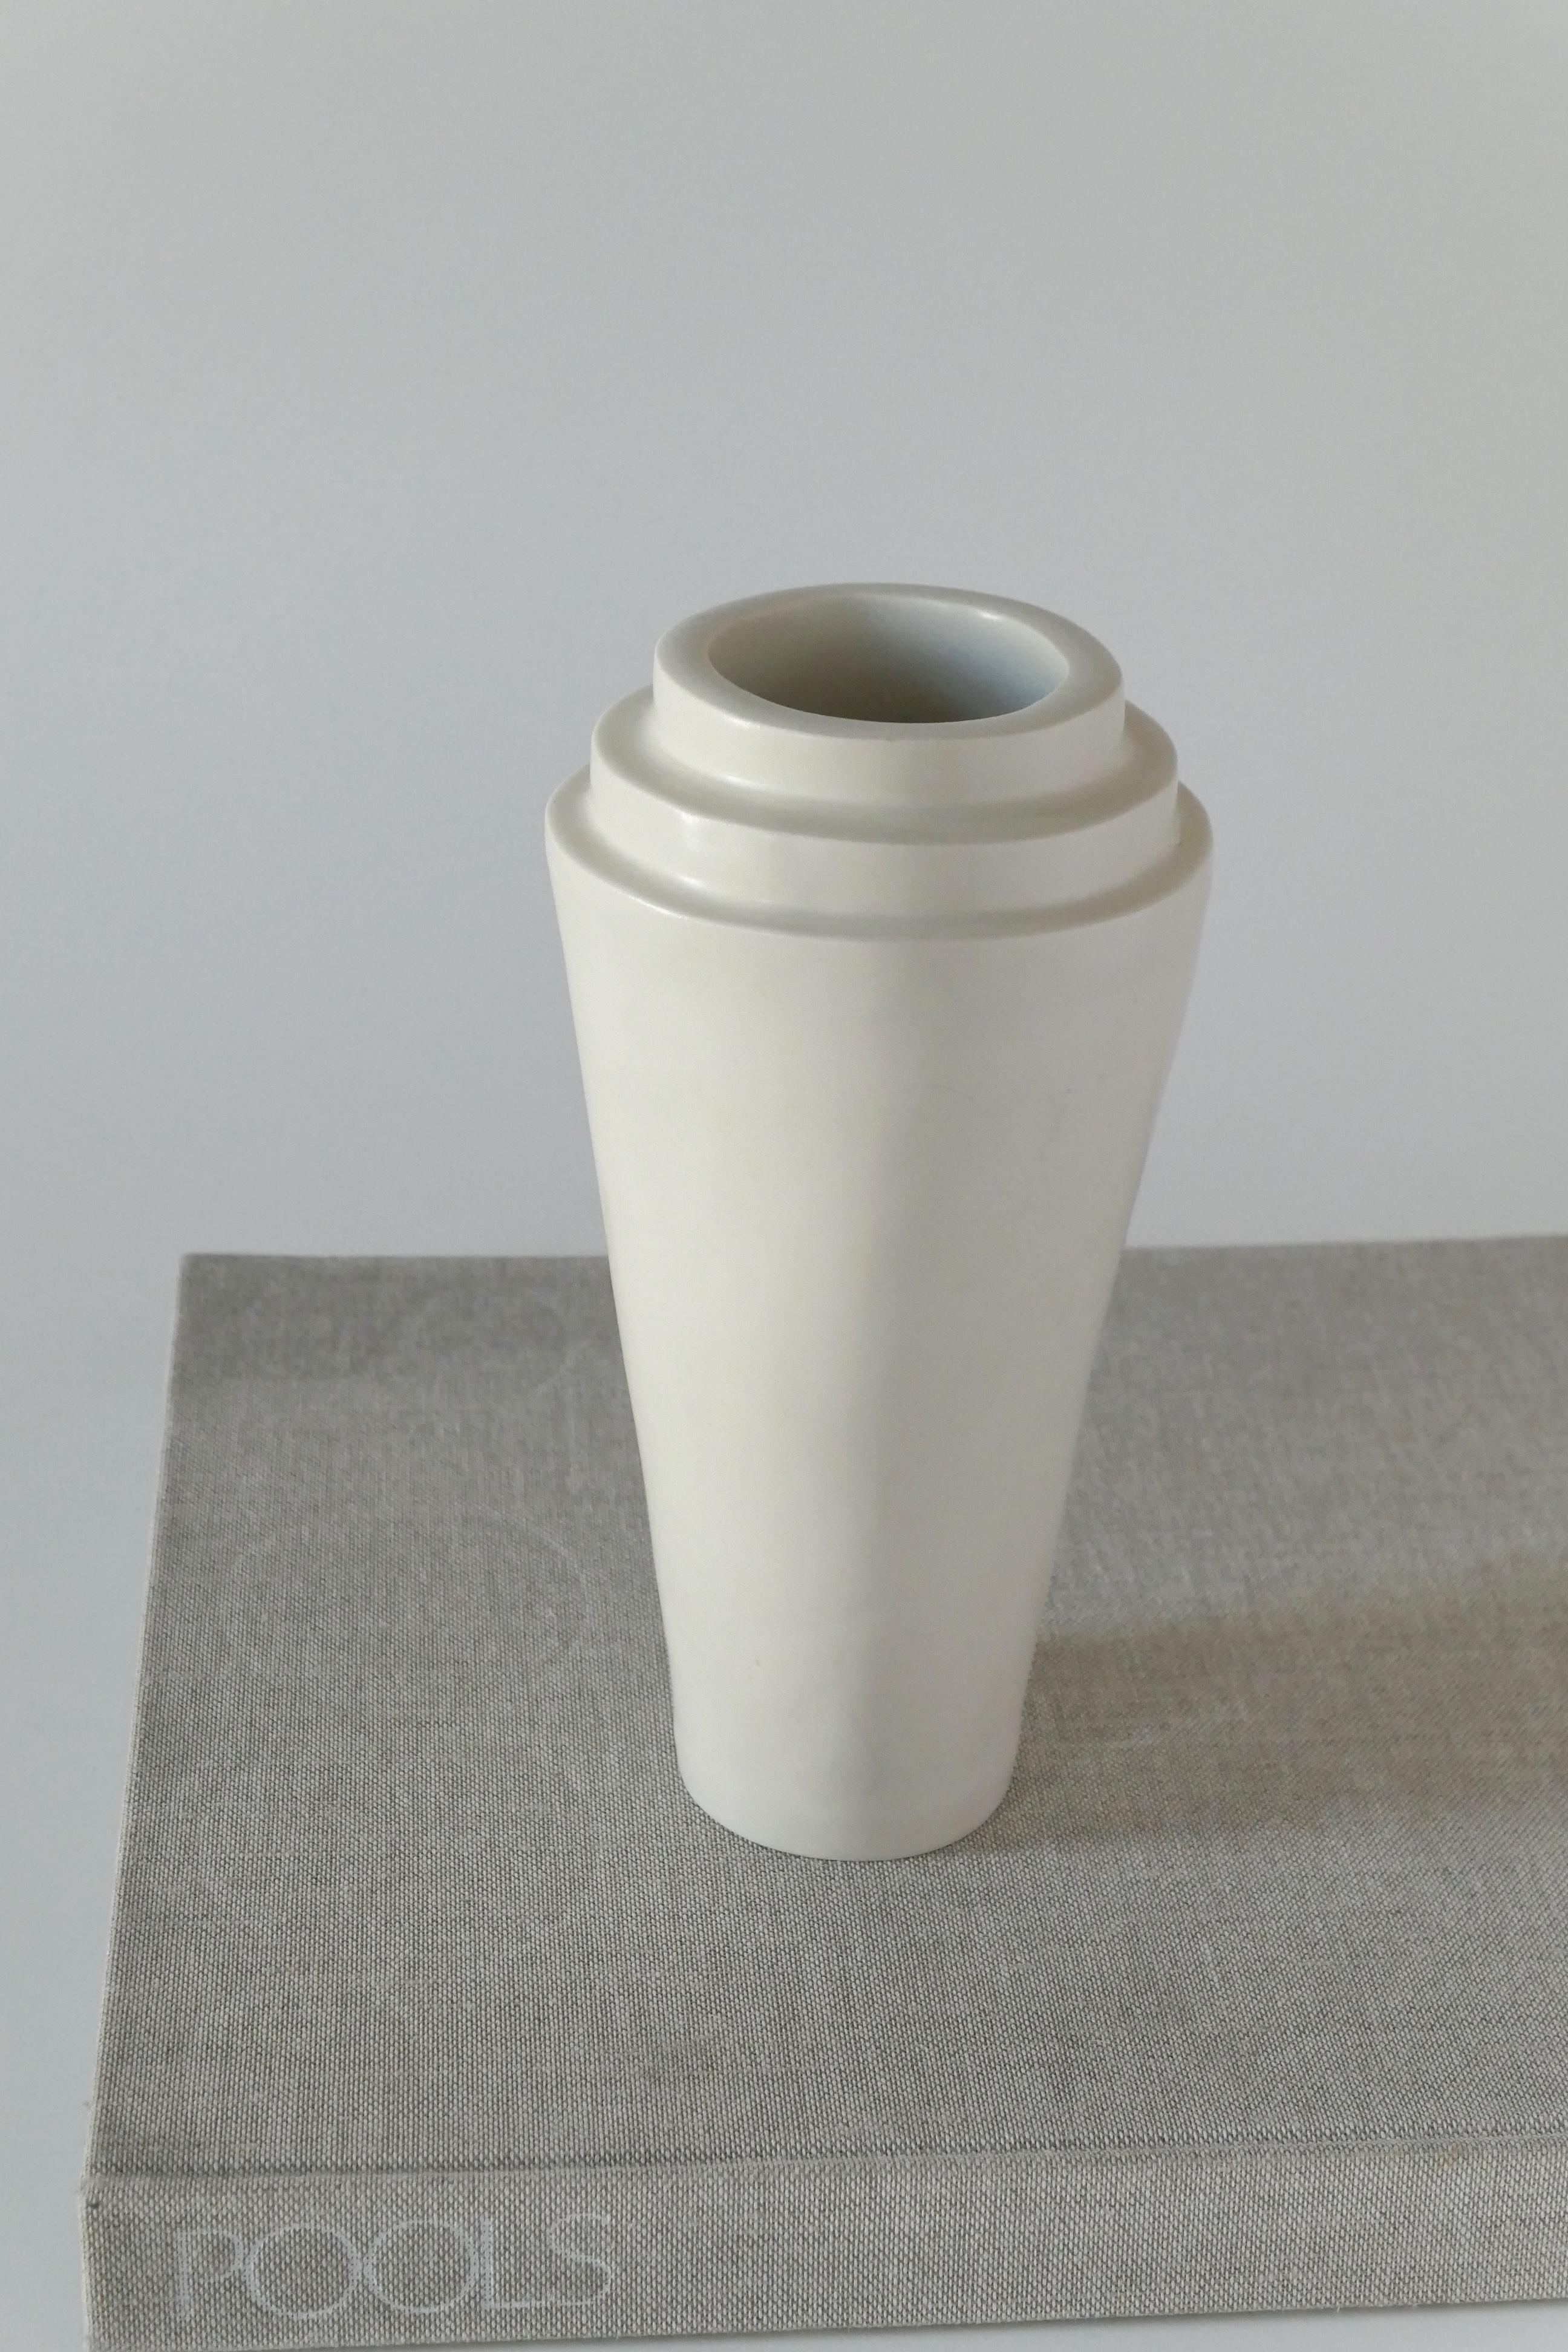 Off-white handbuilt stoneware vase finished with a soft clear glaze. 

Karina Vieira is a Brooklyn-based ceramicist focusing on handbuilt vessels. 

Her work references various styles, touching on the pre-Hispanic, the Bauhaus and Art Deco,